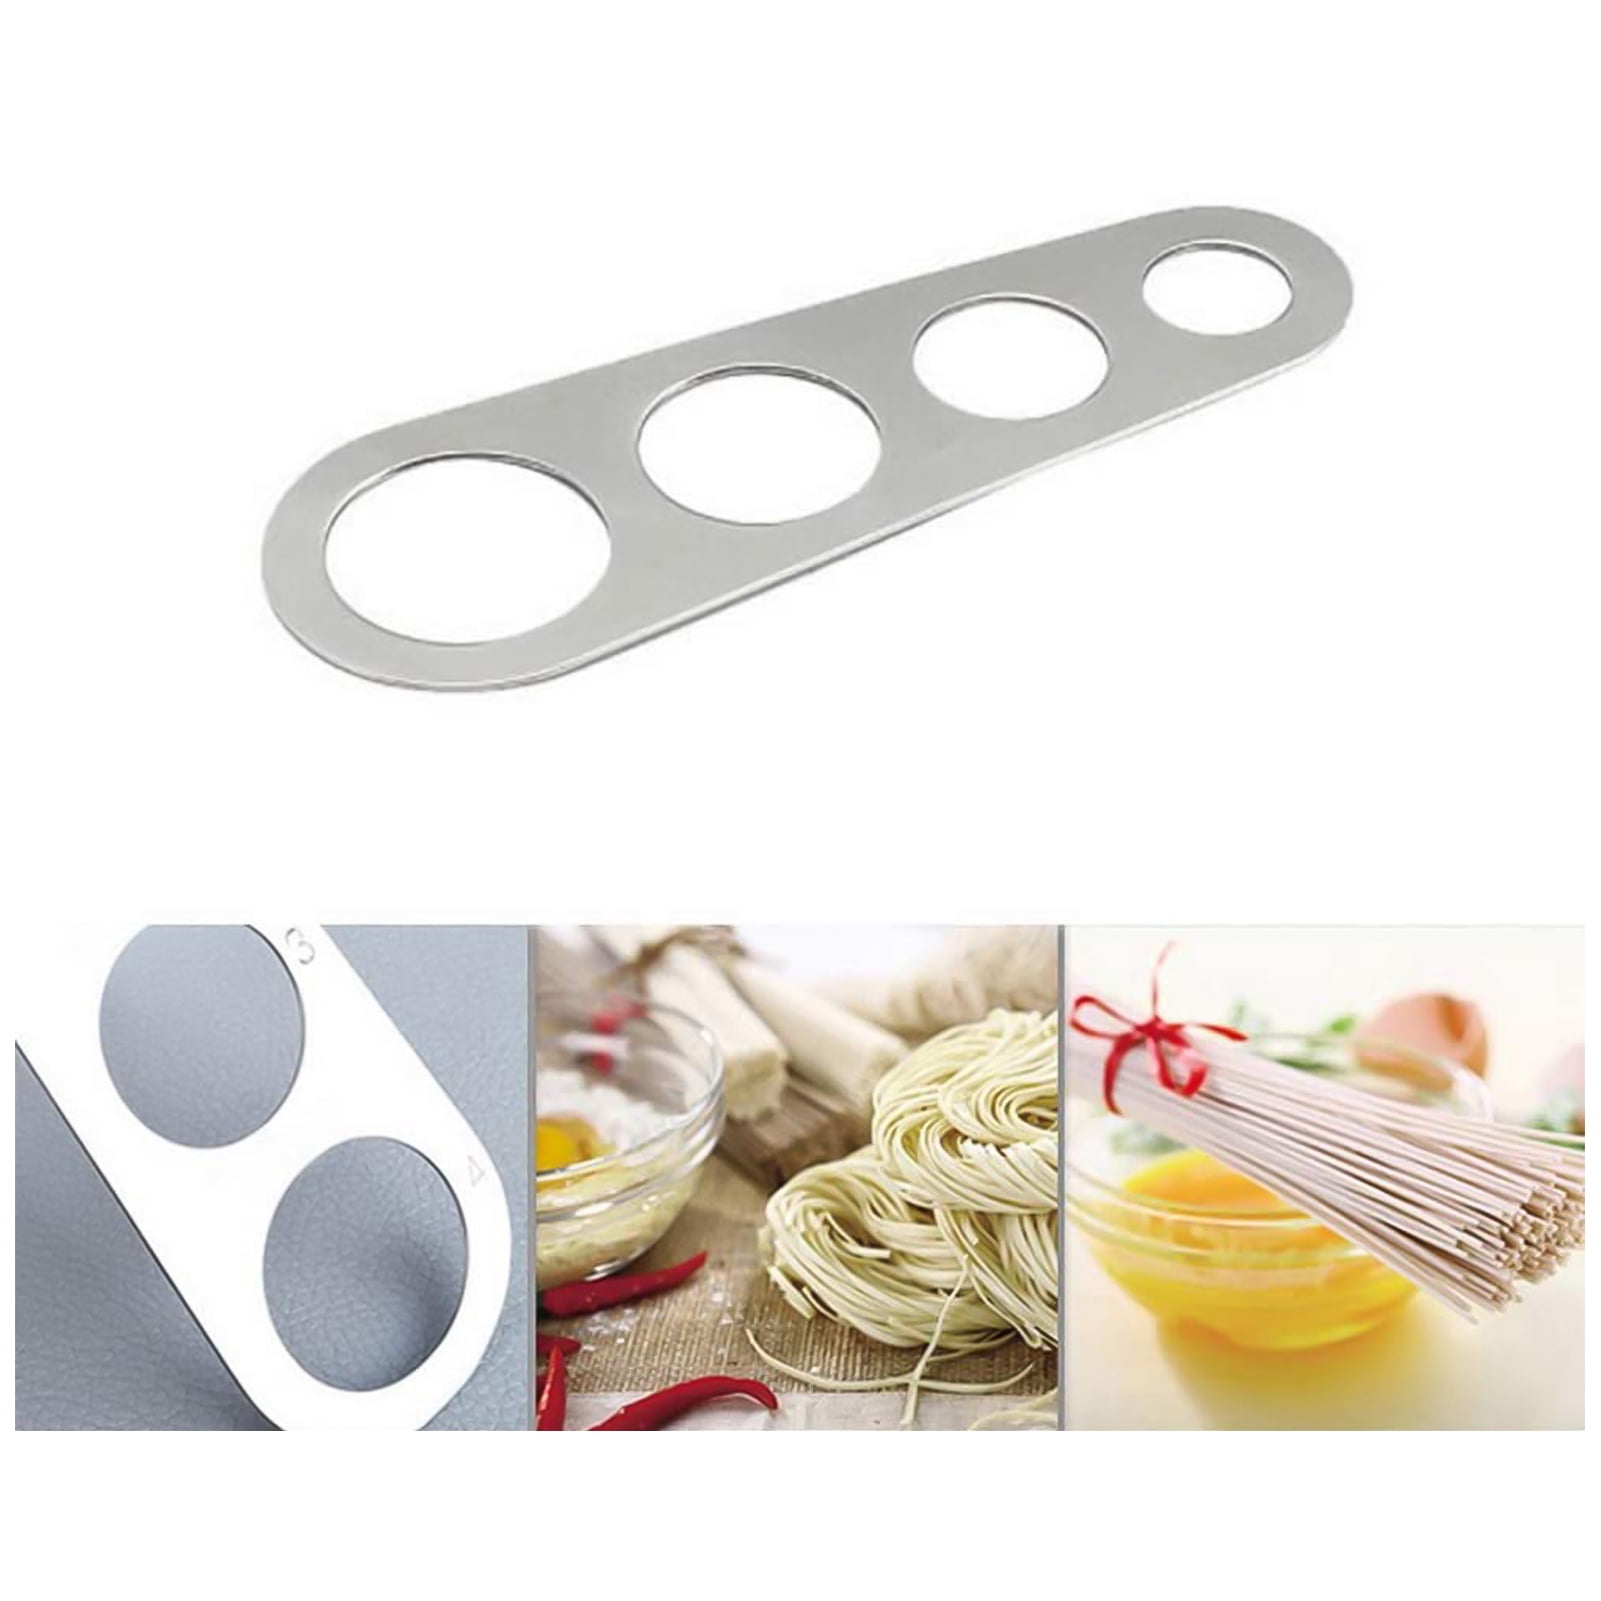 Spaghetti Measuring Gadget-7”L Pasta Portion-Control Tool for Kitchen HOME-X Stainless Steel Spaghetti Measurer Tool 